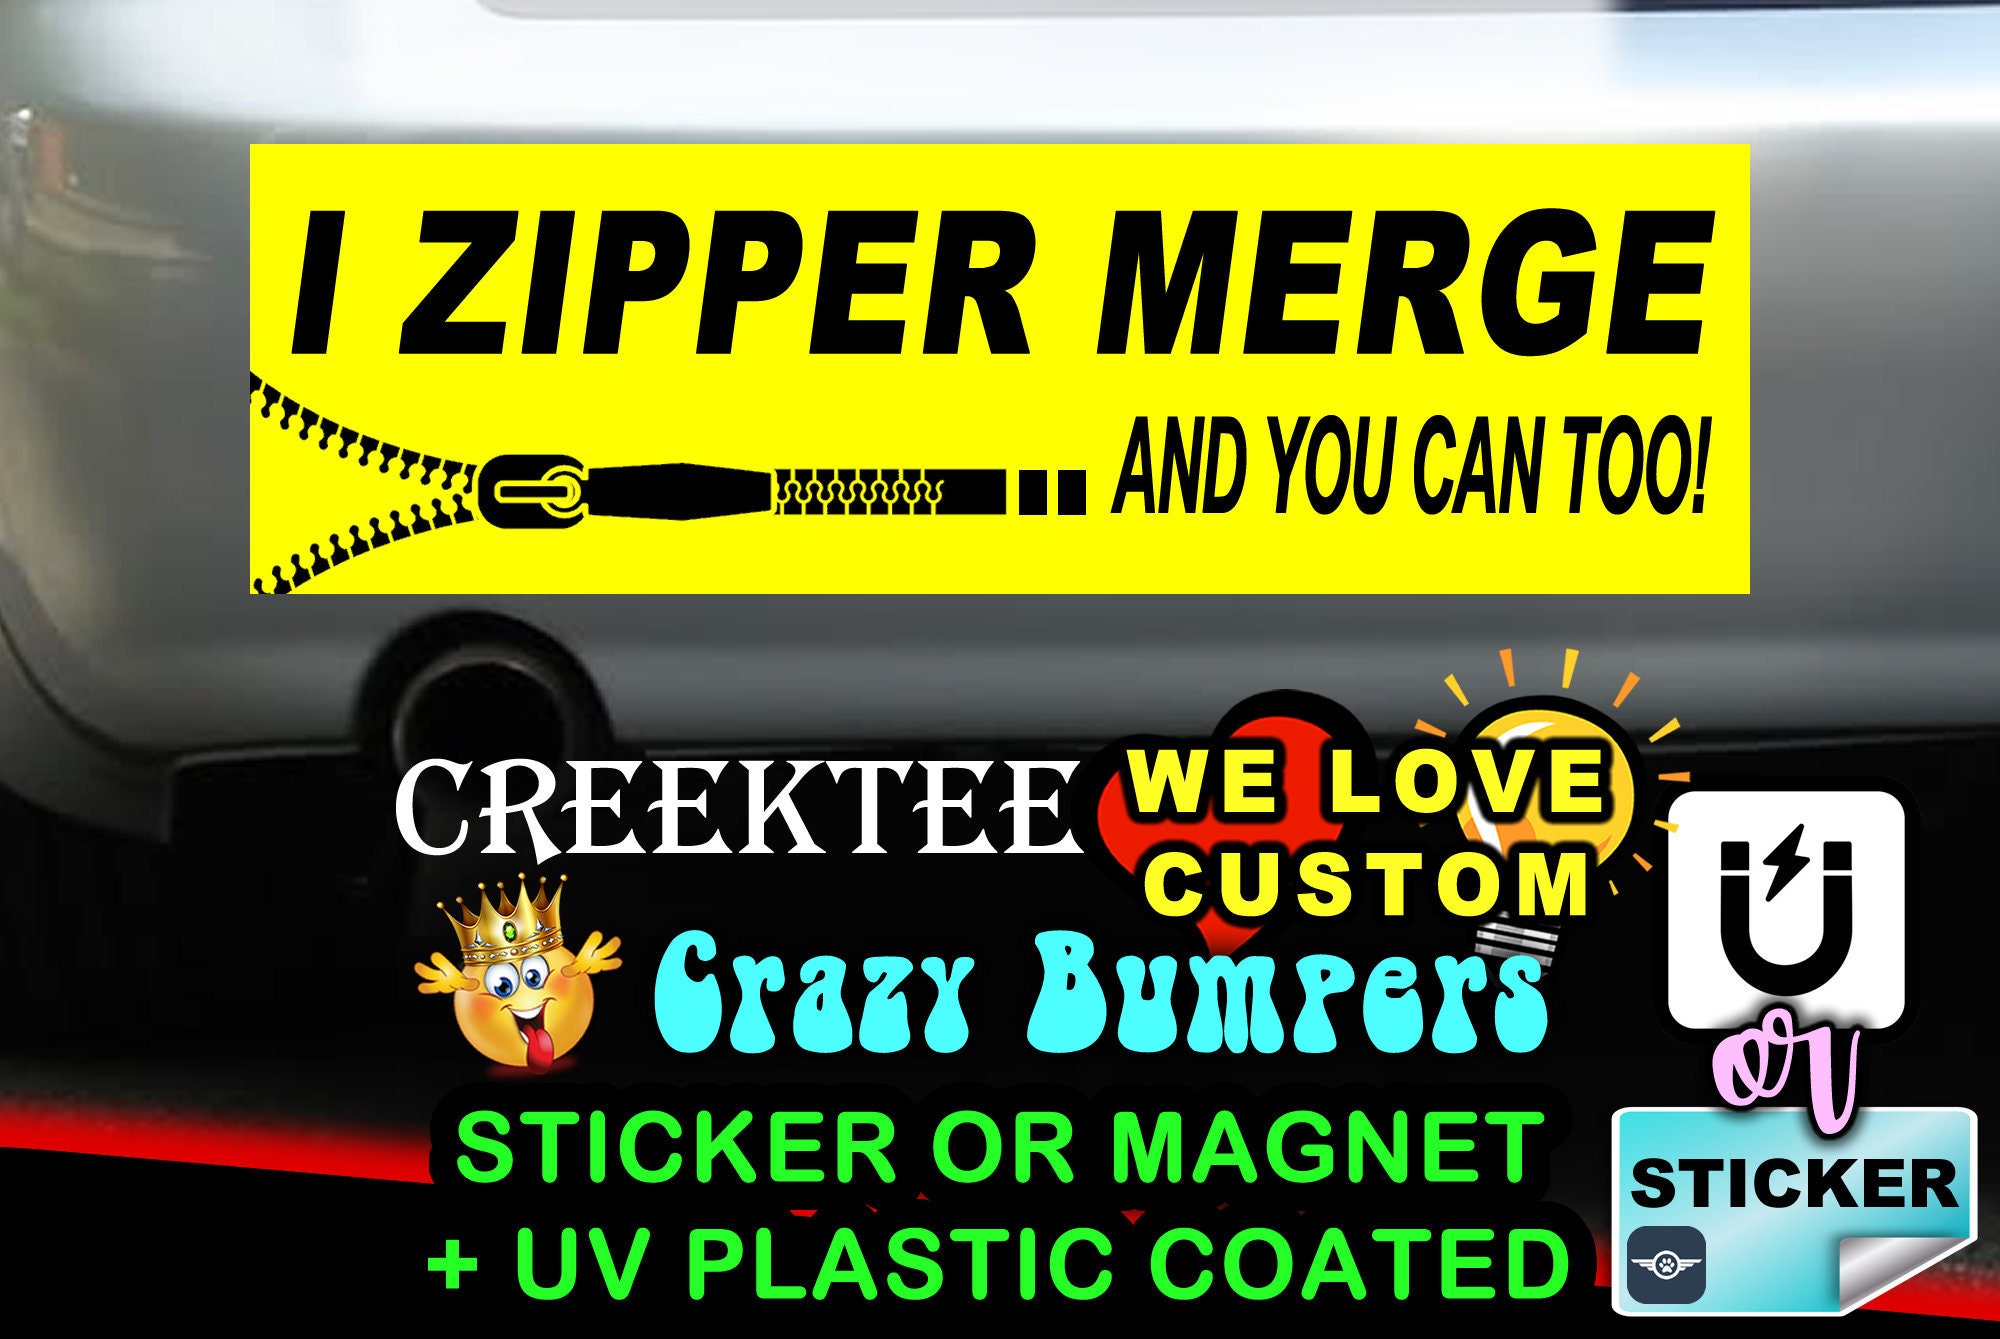 I Zipper Merge And You Can Too Bumper Sticker or Magnet with your text, image or artwork, 8